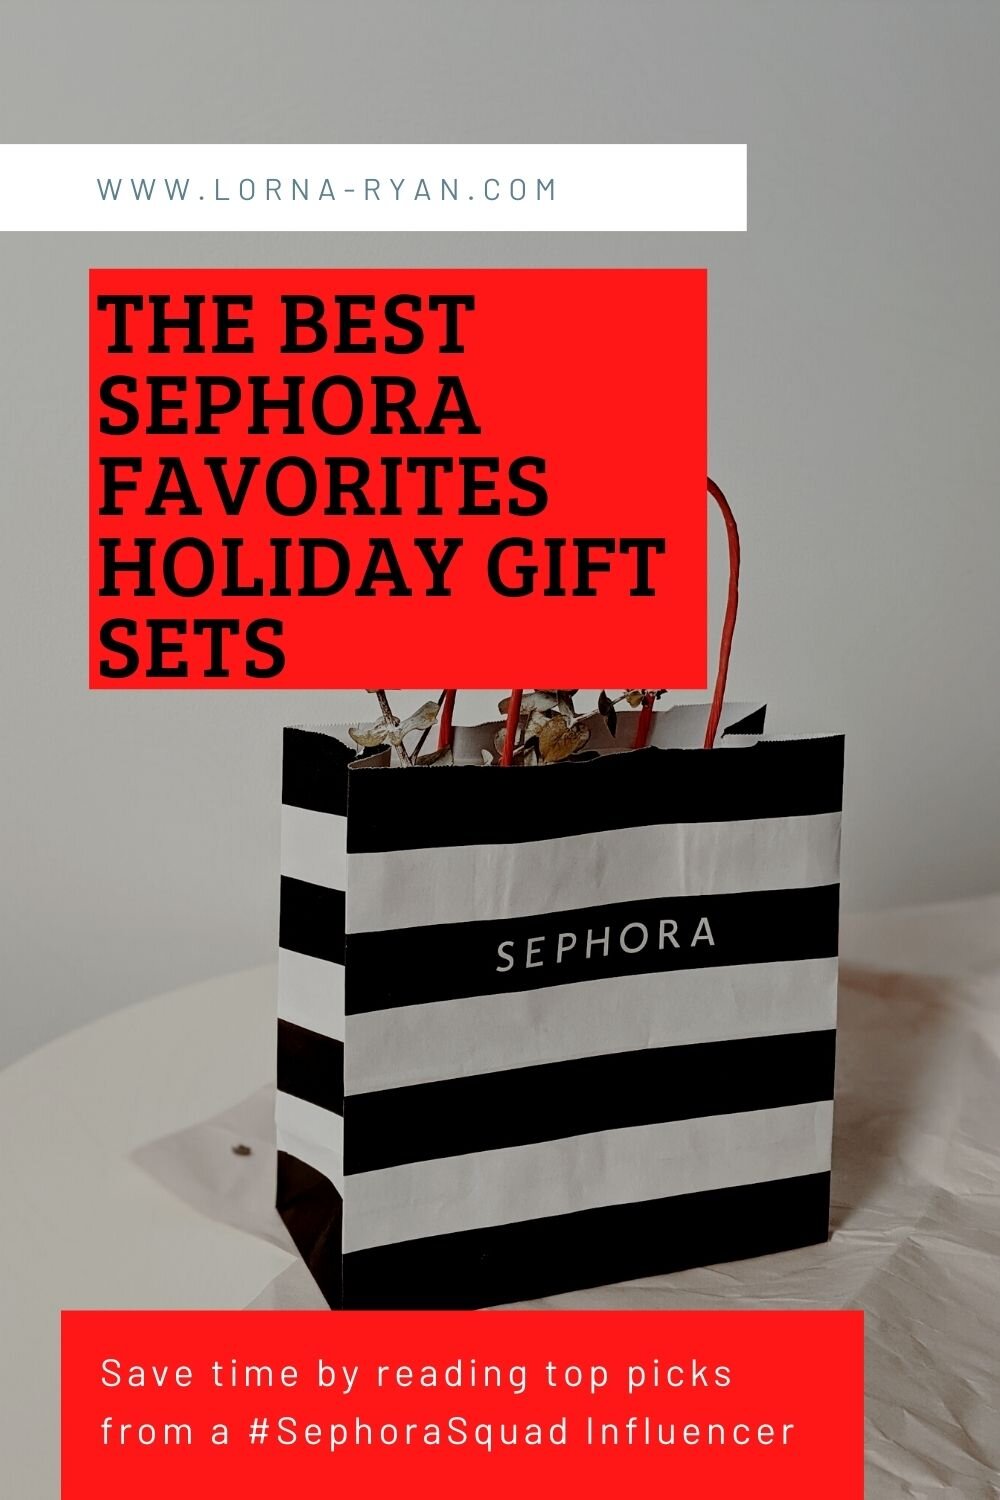 Do not miss out on Sephora holiday 2021! Quickly find out the BEST 10 Sephora Favorites holiday gift sets from the NEW 2021 Sephora Holiday Gift Sets range from a #SephoraSquad influencer. Sephora have just launched exclusive gift sets for 2021 holi…